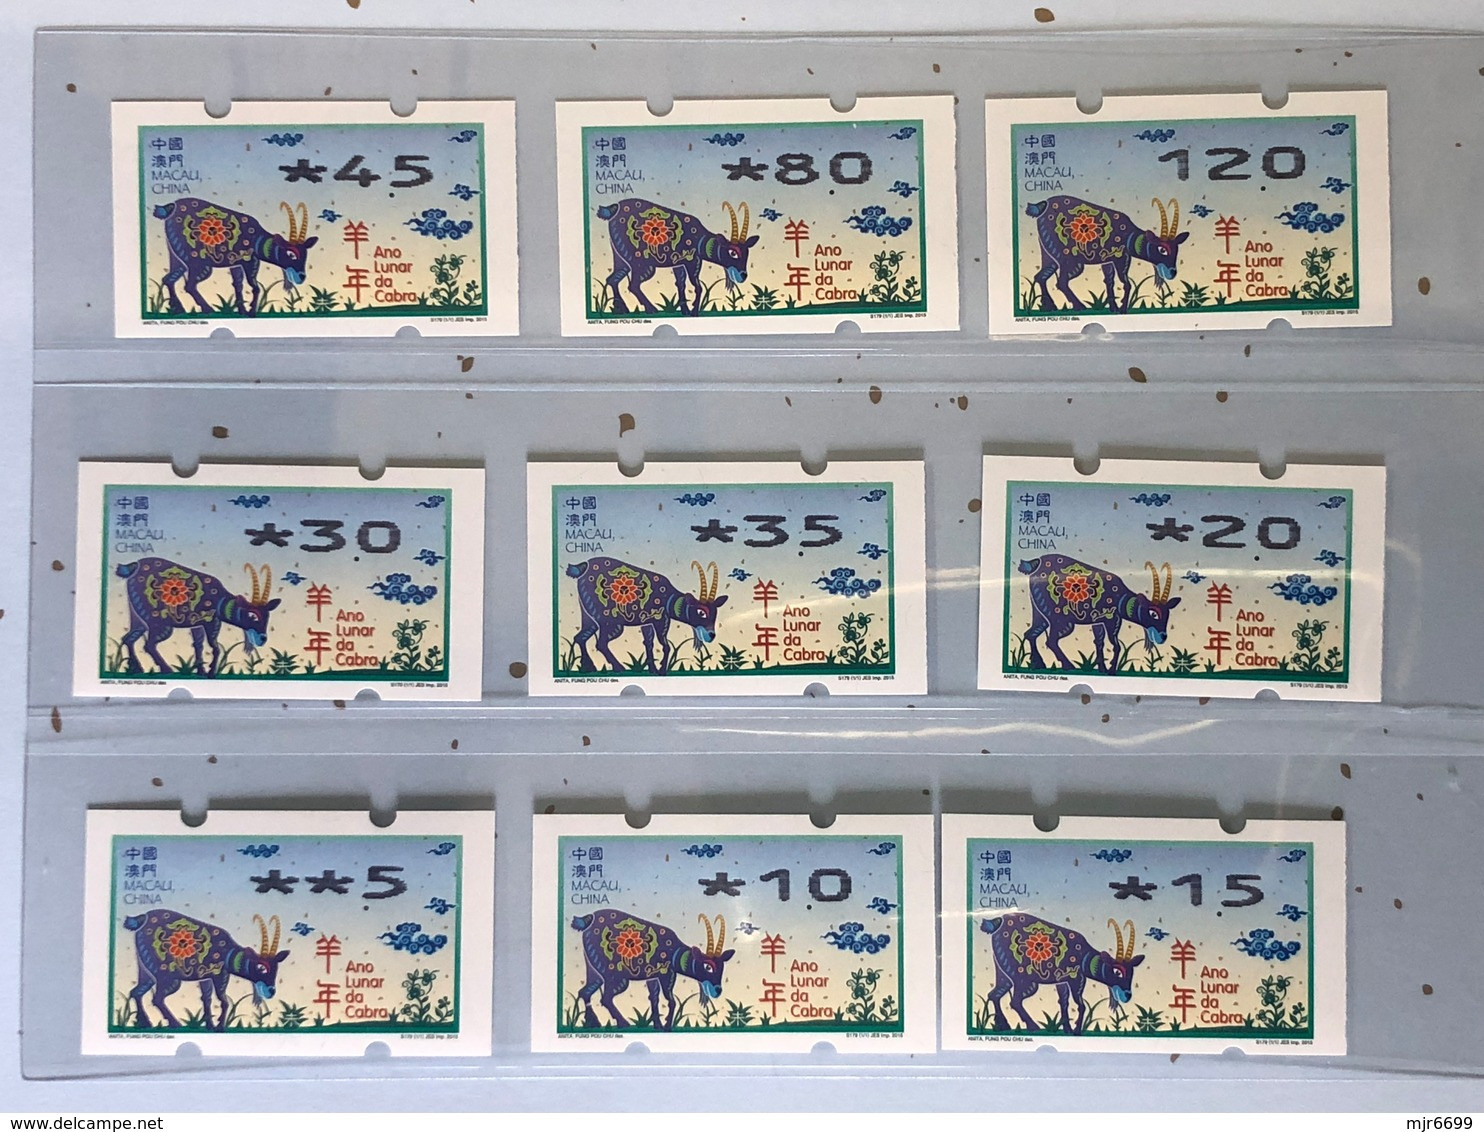 MACAU ATM LABELS, ZODIAC NEW YEAR OF THE GOAT ISSUE COMPLETE SET NAGLER 104 ALL FINE UM MINT - Automatenmarken